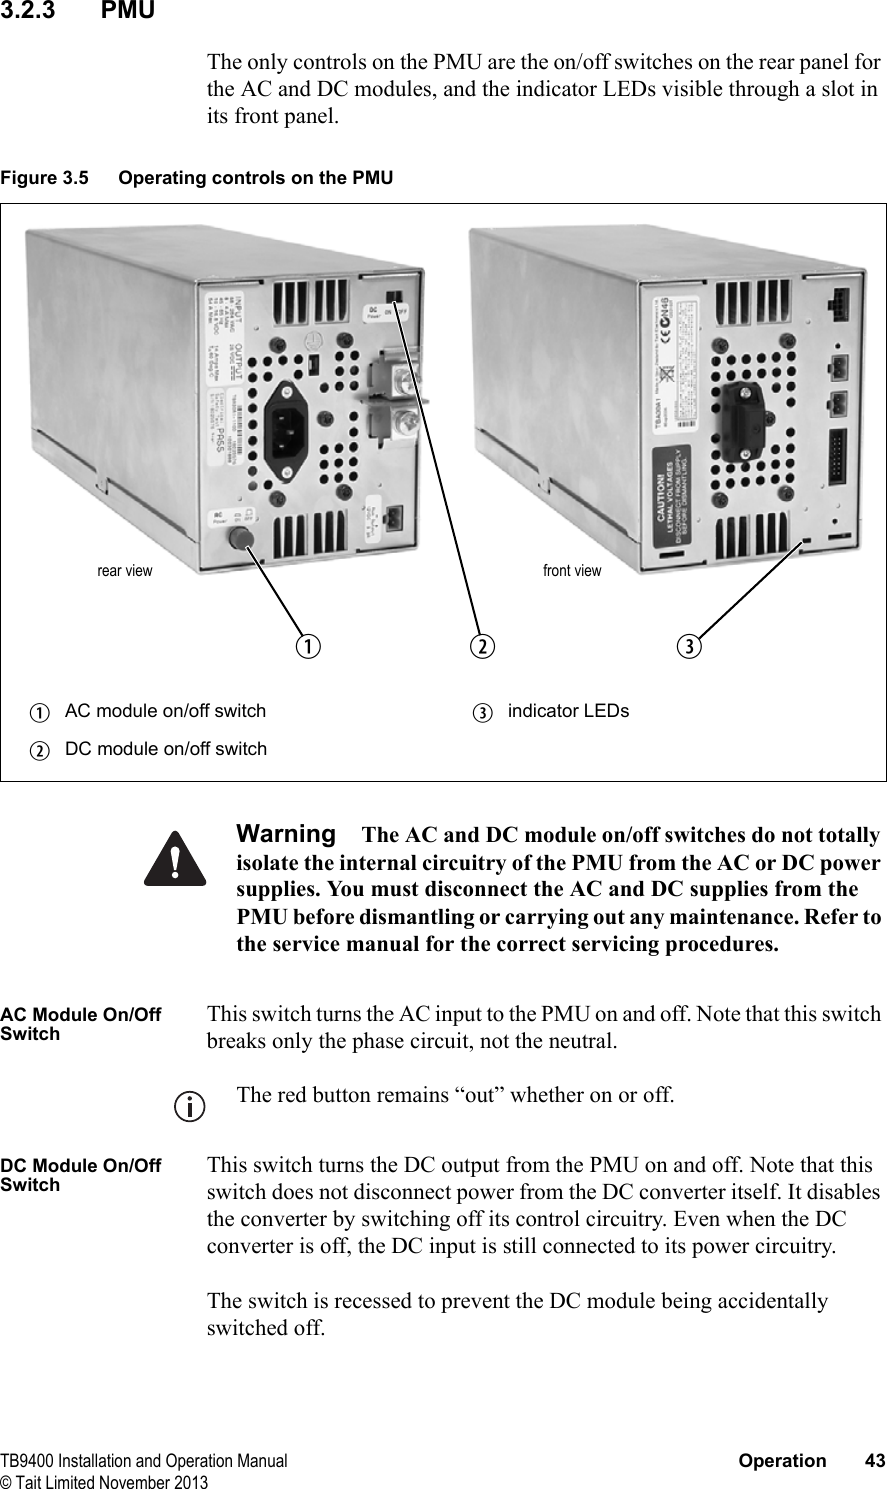  TB9400 Installation and Operation Manual Operation 43© Tait Limited November 20133.2.3 PMUThe only controls on the PMU are the on/off switches on the rear panel for the AC and DC modules, and the indicator LEDs visible through a slot in its front panel.Warning The AC and DC module on/off switches do not totally isolate the internal circuitry of the PMU from the AC or DC power supplies. You must disconnect the AC and DC supplies from the PMU before dismantling or carrying out any maintenance. Refer to the service manual for the correct servicing procedures.AC Module On/Off SwitchThis switch turns the AC input to the PMU on and off. Note that this switch breaks only the phase circuit, not the neutral.The red button remains “out” whether on or off.DC Module On/Off SwitchThis switch turns the DC output from the PMU on and off. Note that this switch does not disconnect power from the DC converter itself. It disables the converter by switching off its control circuitry. Even when the DC converter is off, the DC input is still connected to its power circuitry. The switch is recessed to prevent the DC module being accidentally switched off. Figure 3.5 Operating controls on the PMUbAC module on/off switch dindicator LEDscDC module on/off switchbcrear viewdfront view